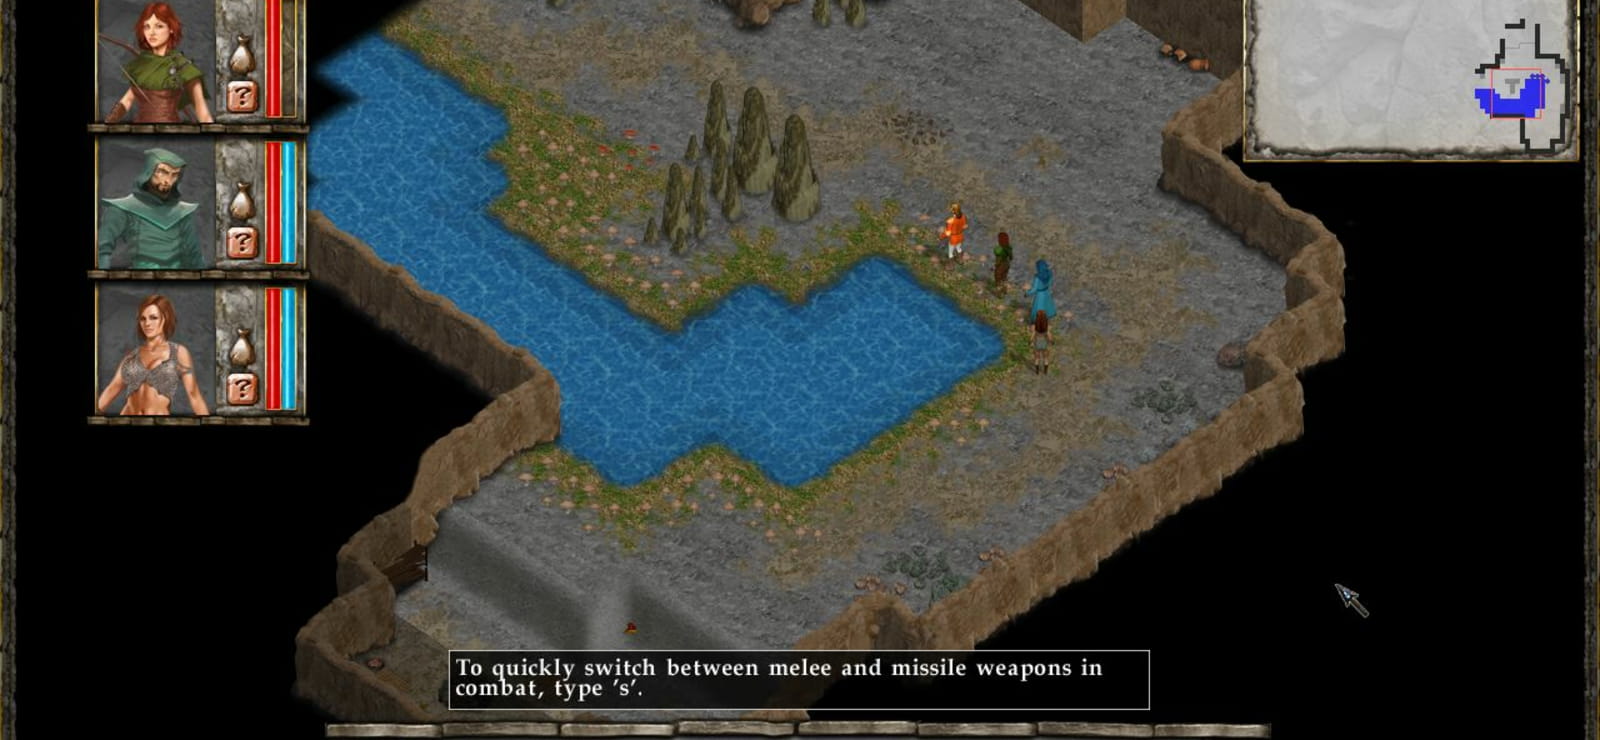 Avernum: Escape From The Pit